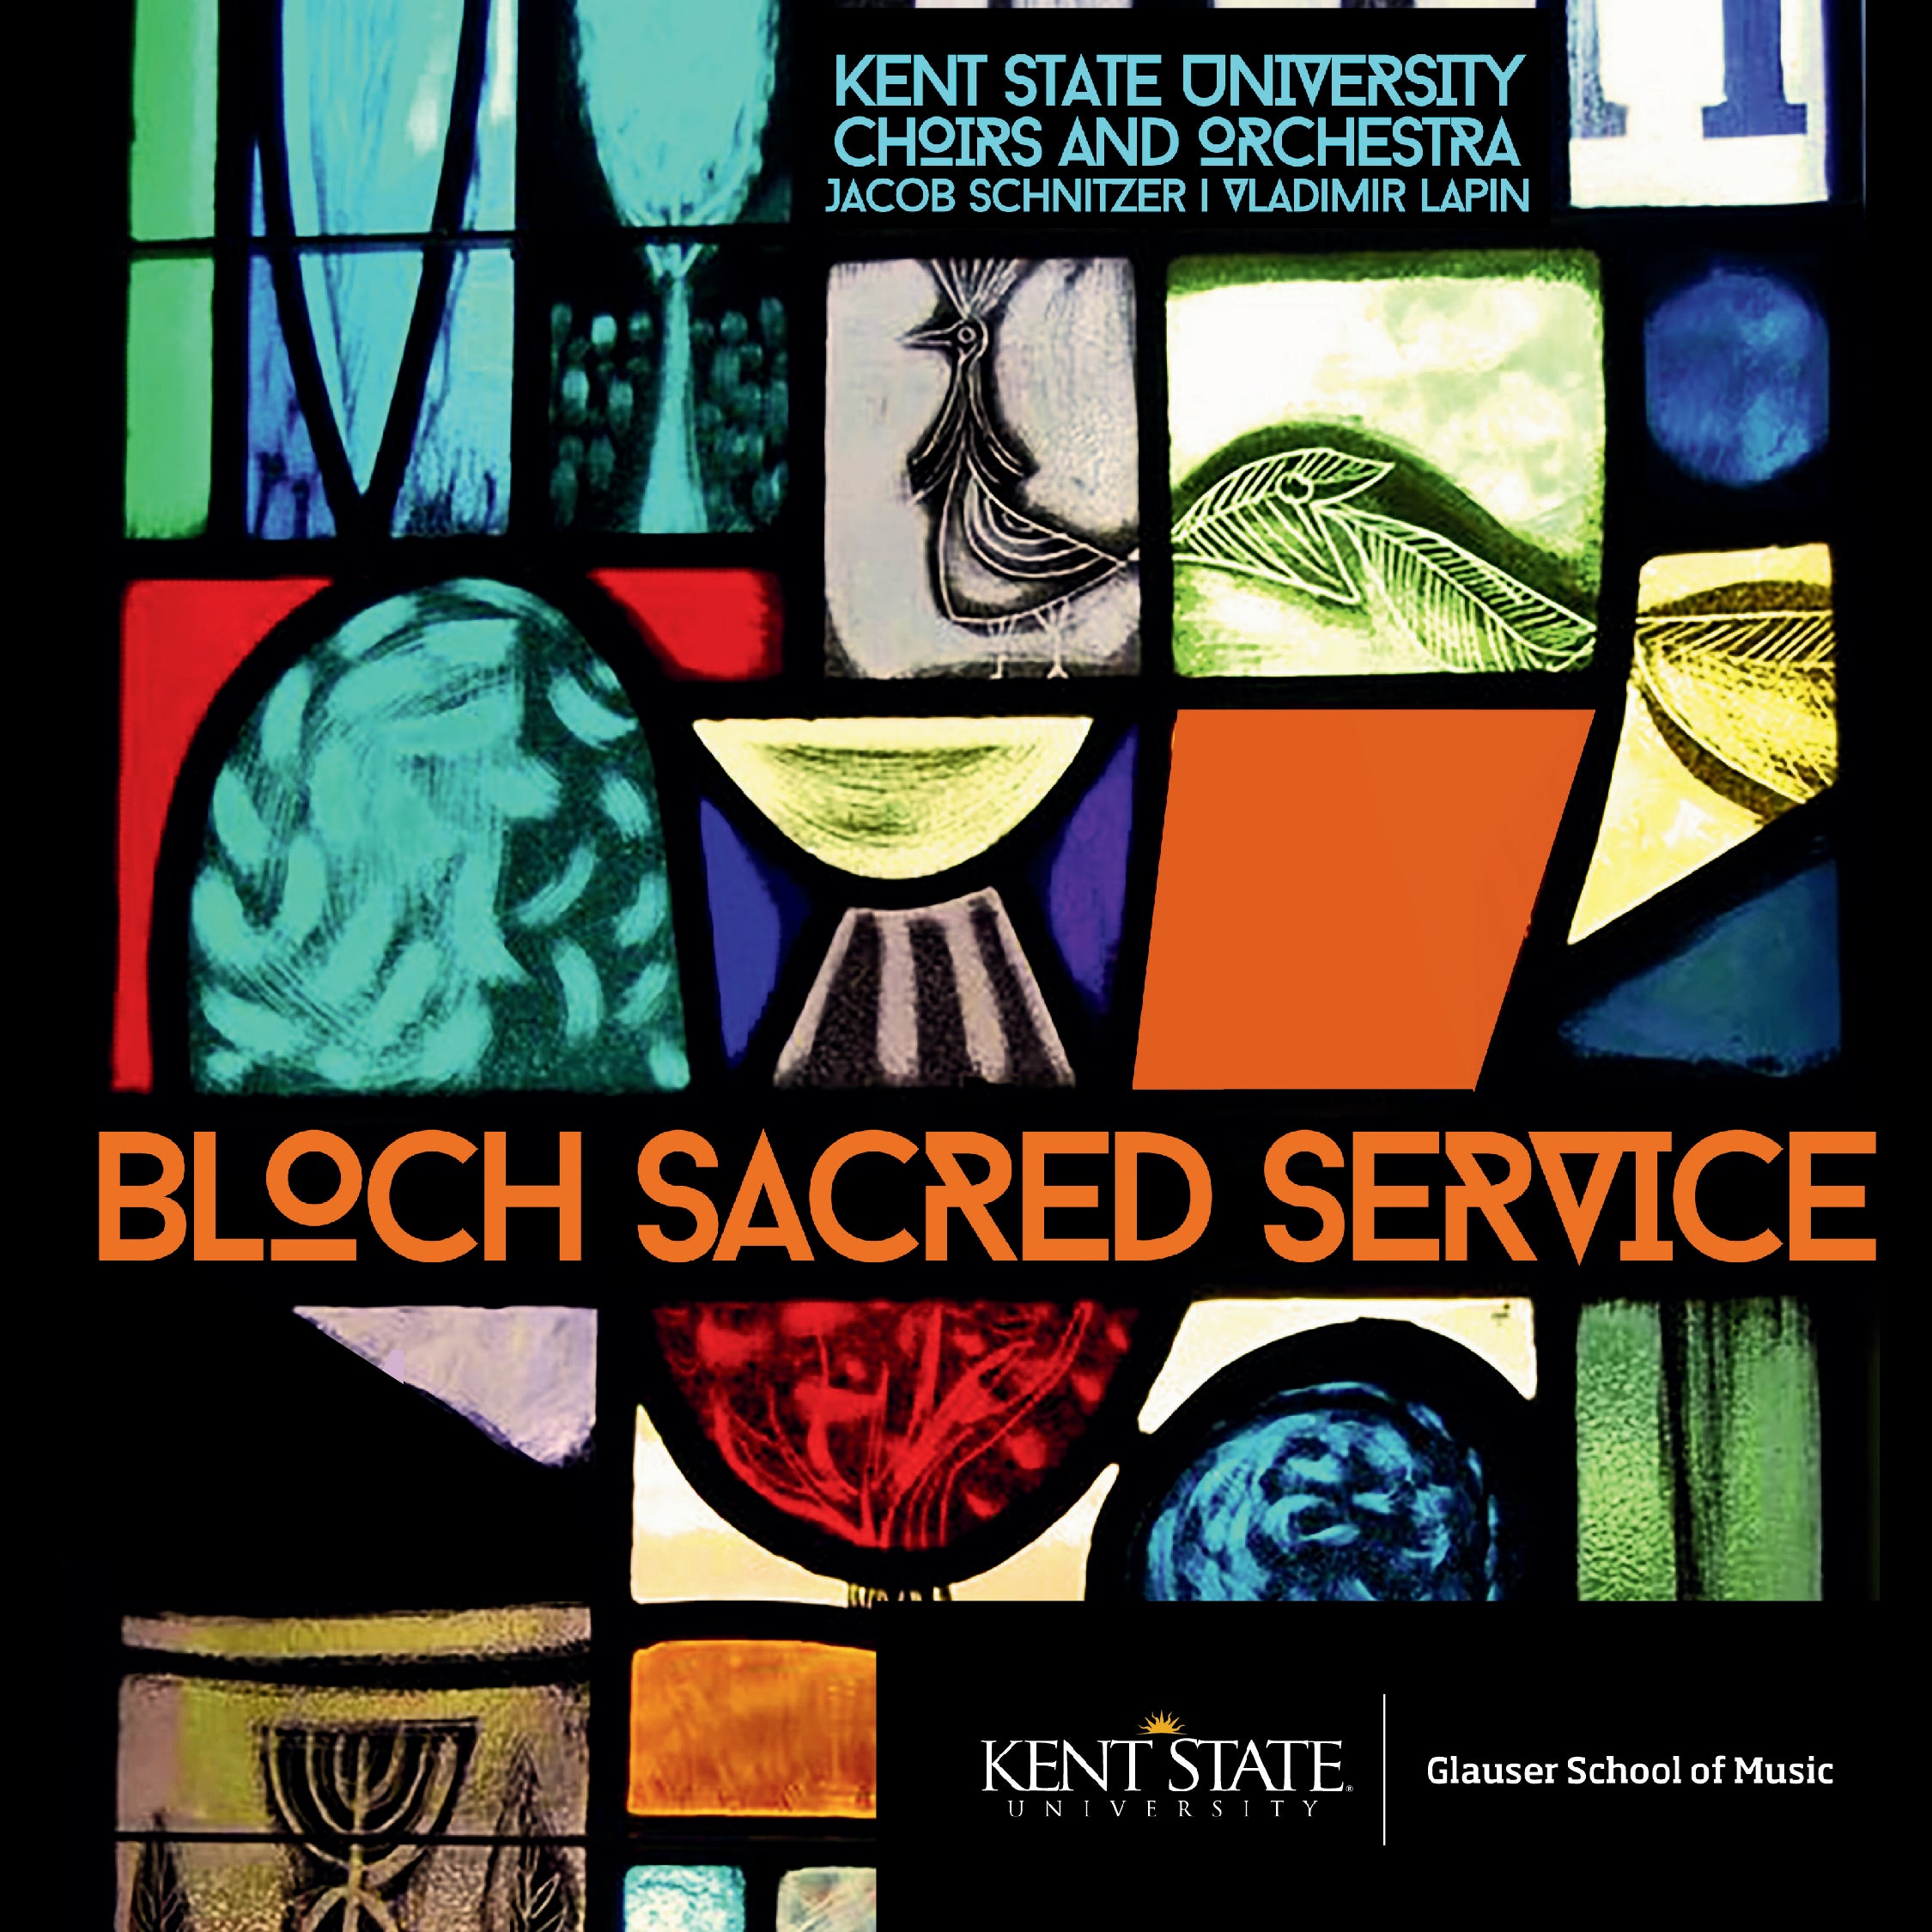 Bloch Service, Stained Glass